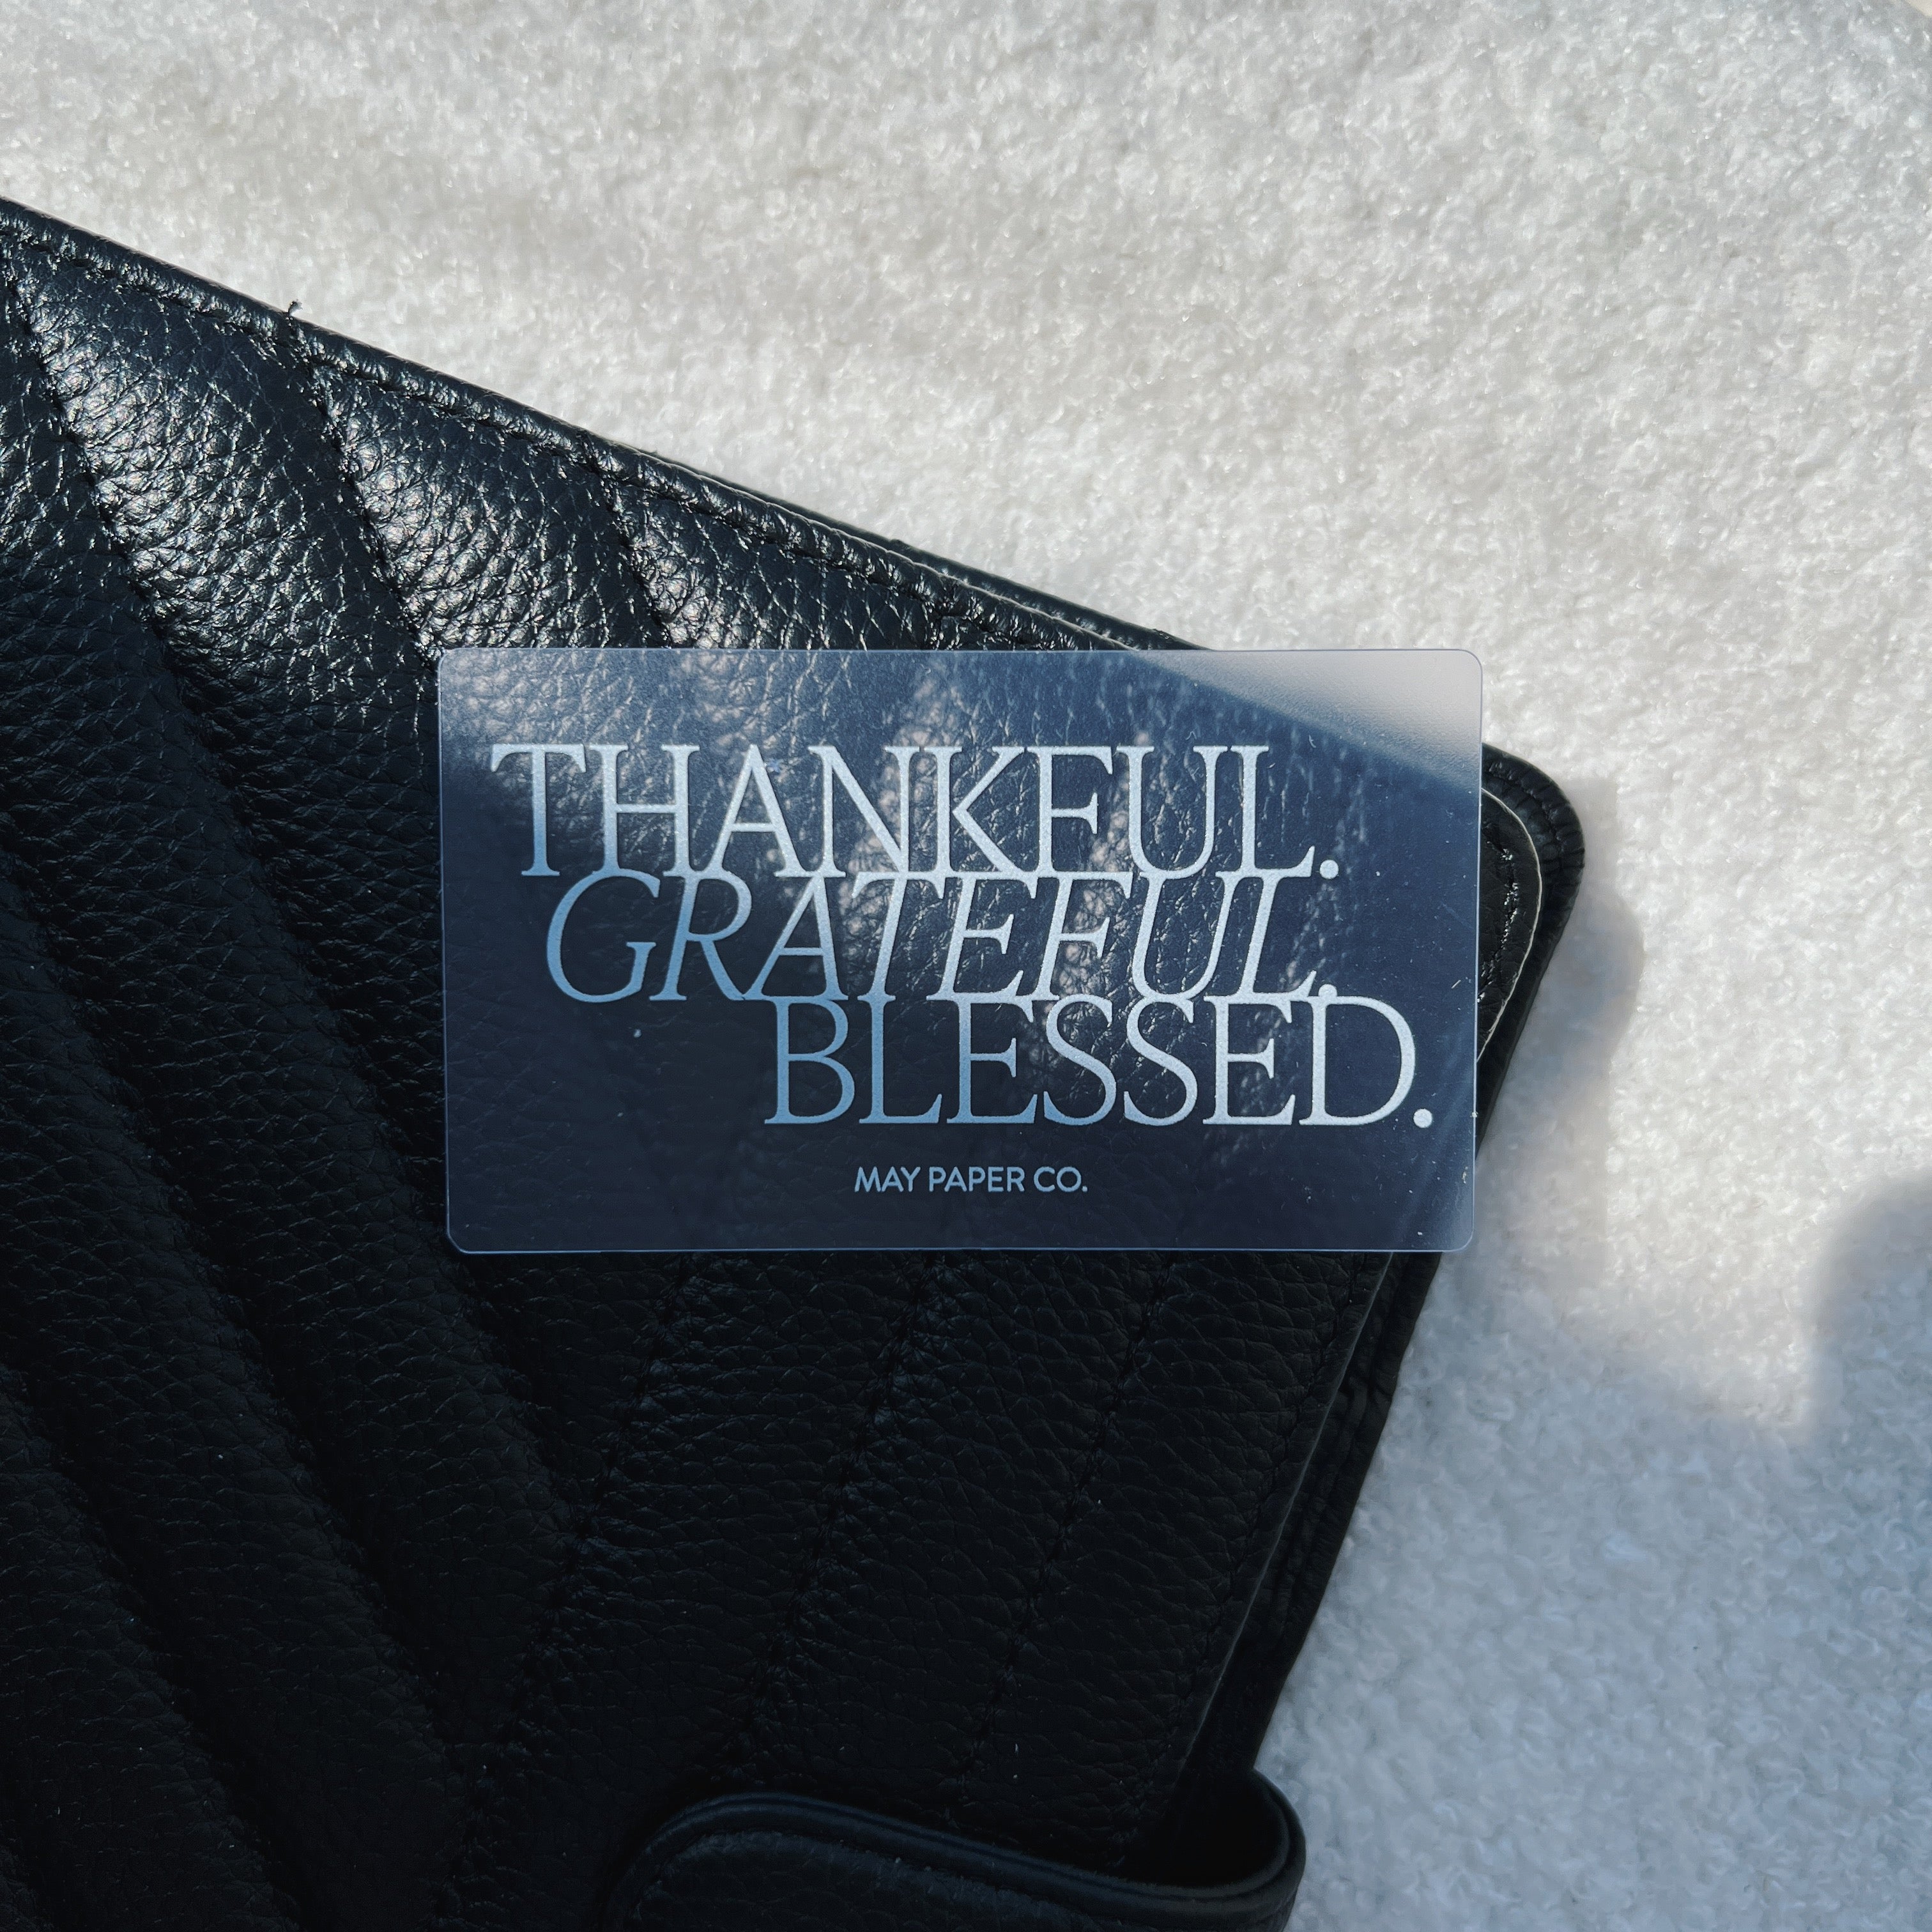 Thankful, Grateful, Blessed Frosted Planner Card